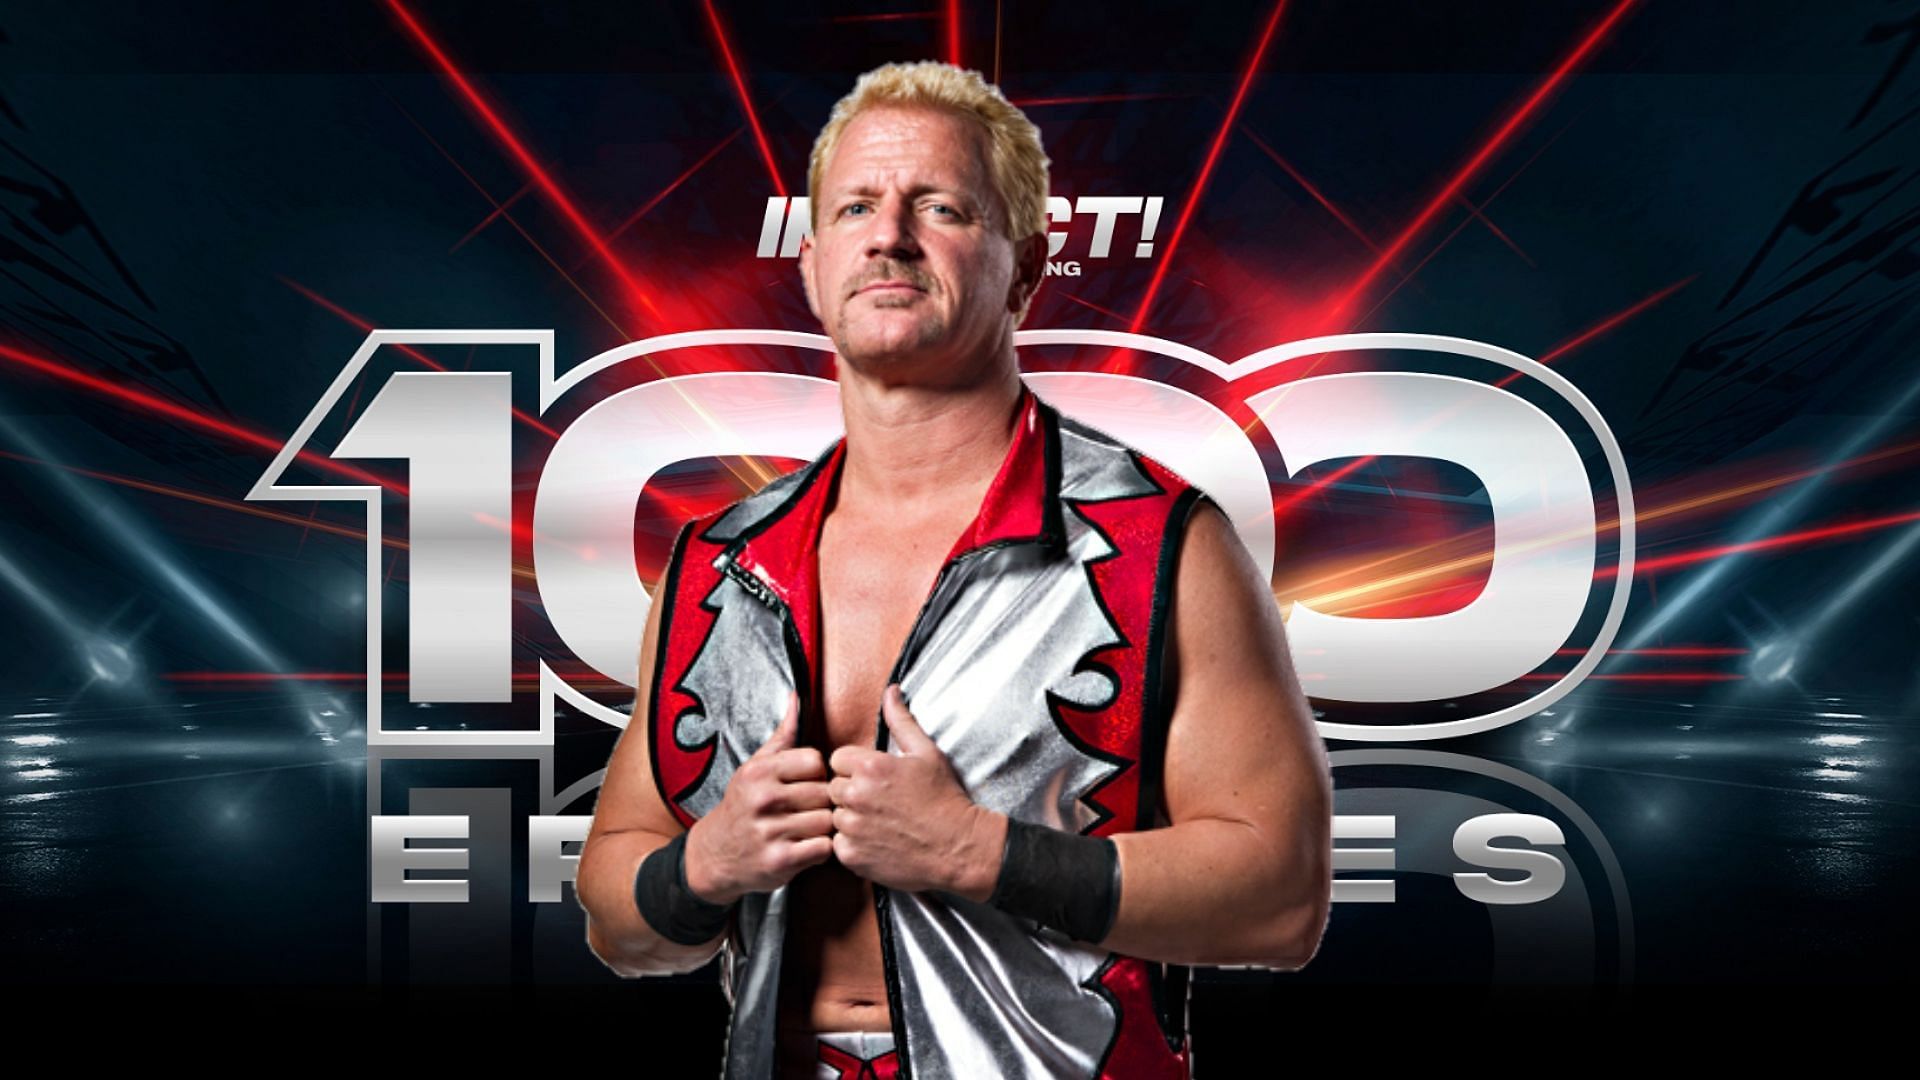 Does Jeff Jarrett have heat with IMPACT Wrestling?